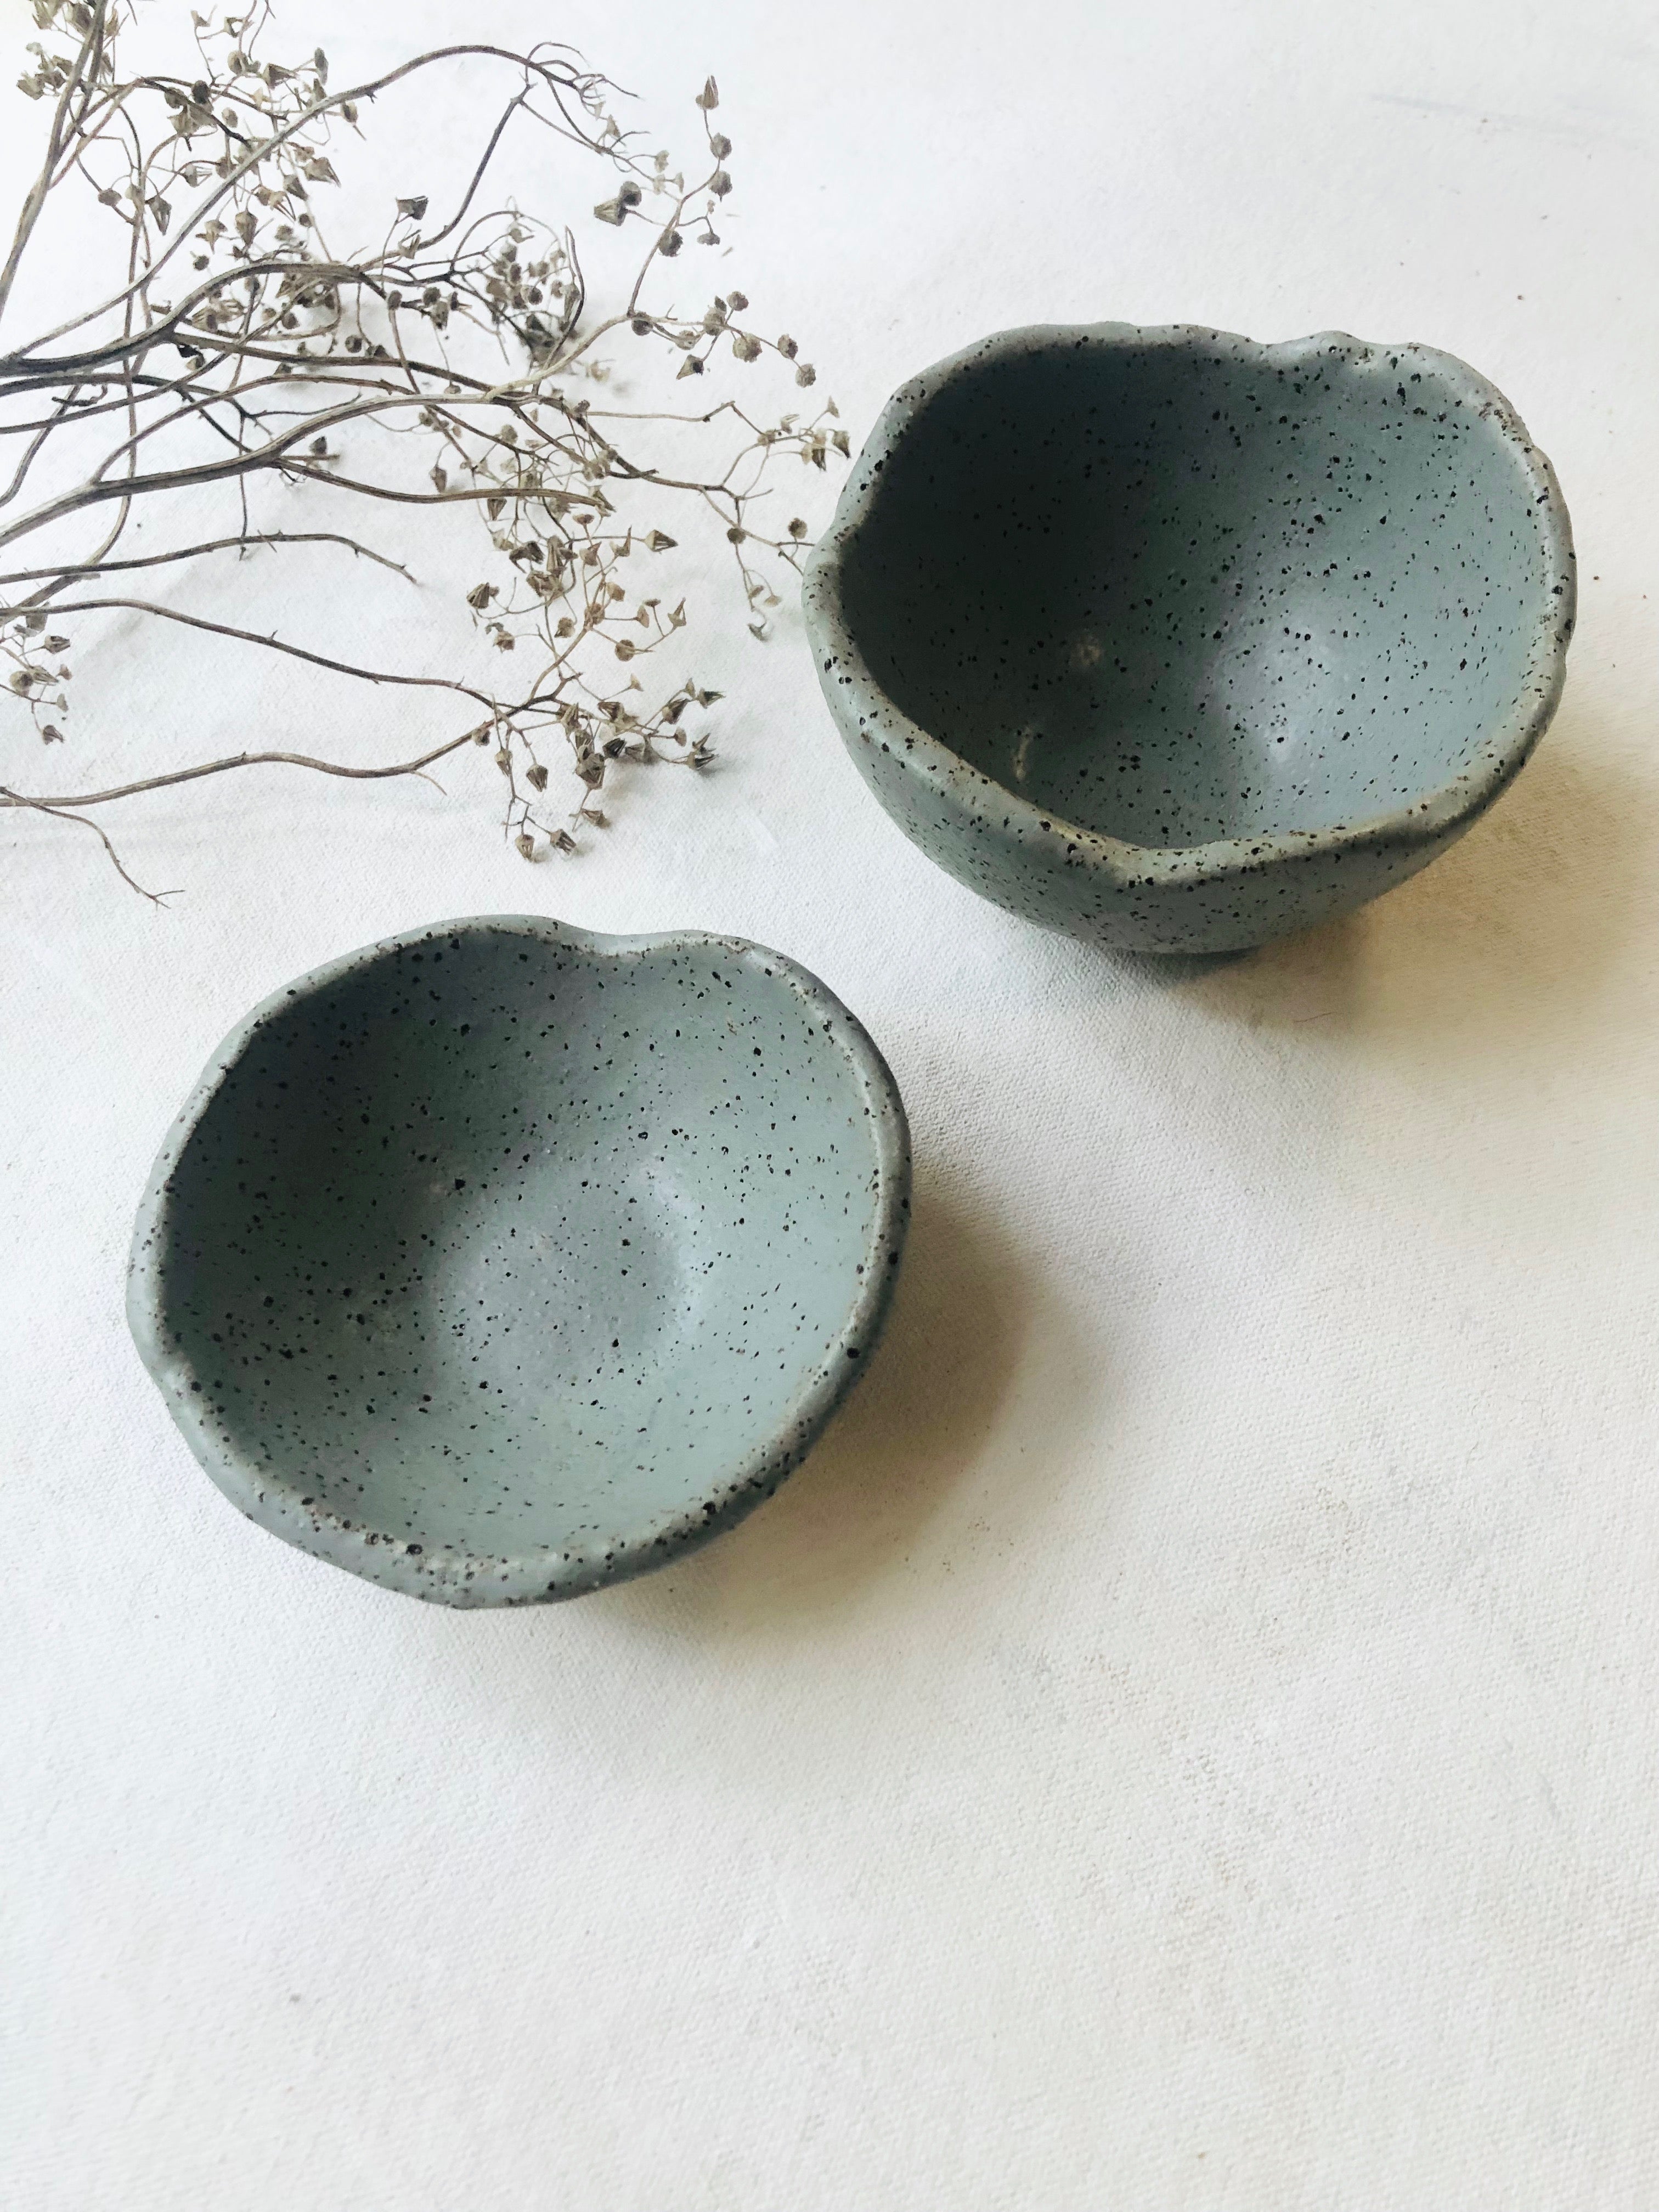 Tableware - Small Bowls - Speckled in Silver Wattle